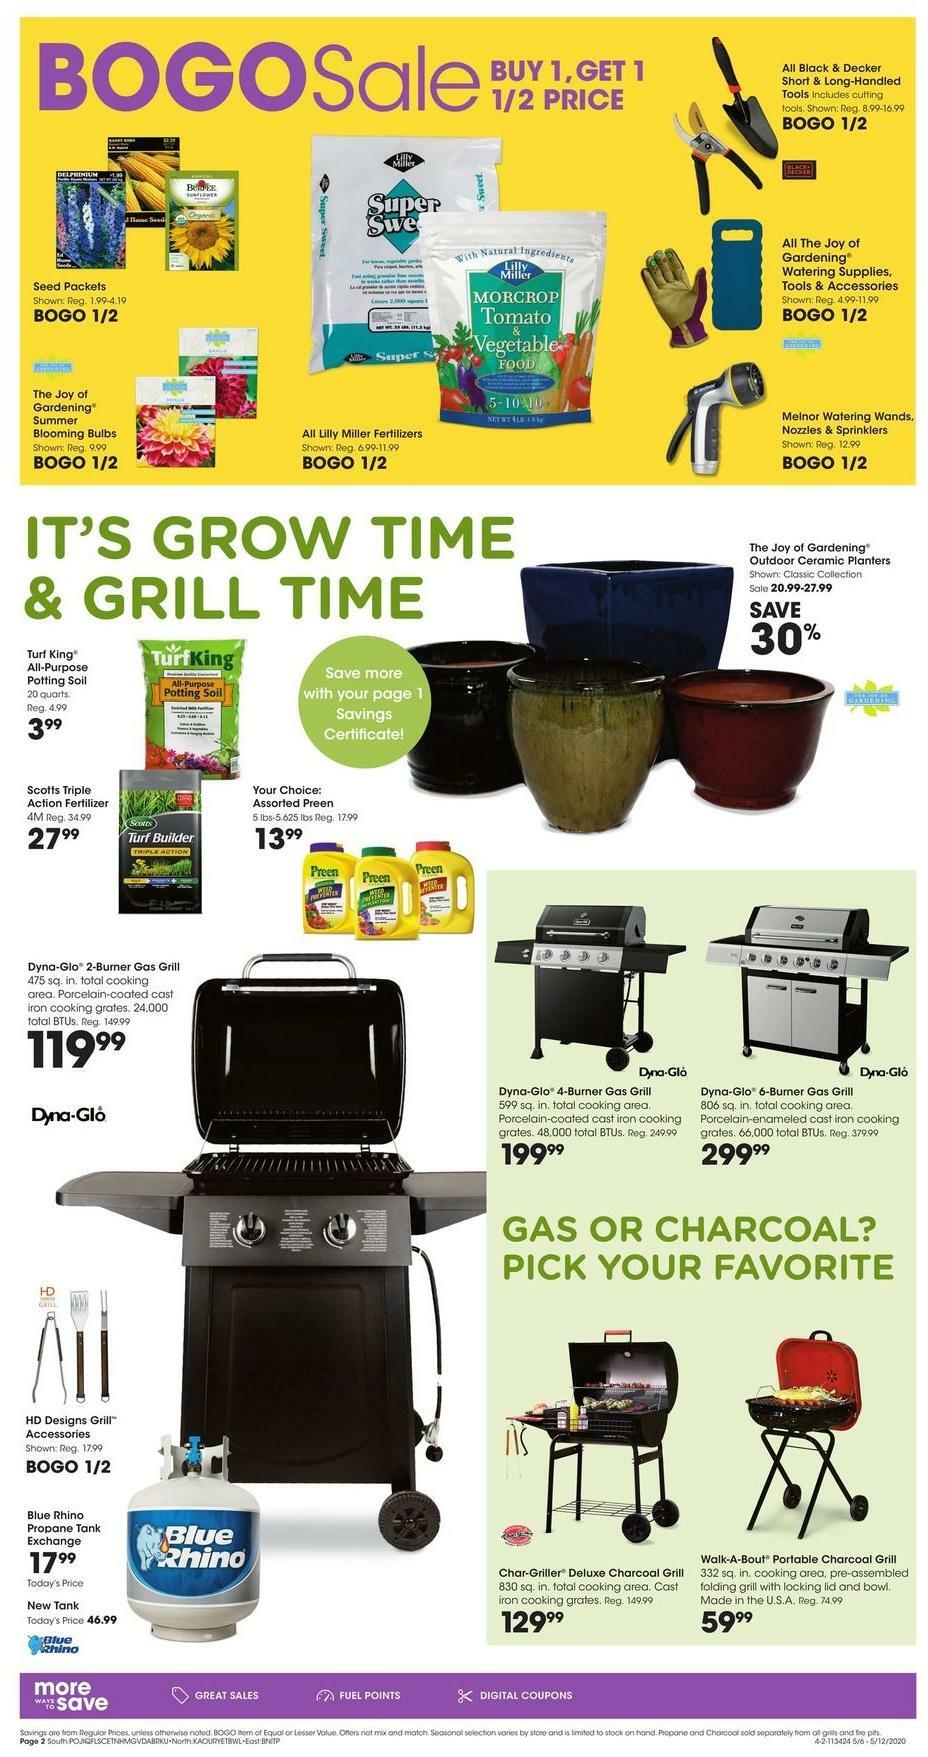 Fred Meyer General Merchandise Weekly Ad from May 6